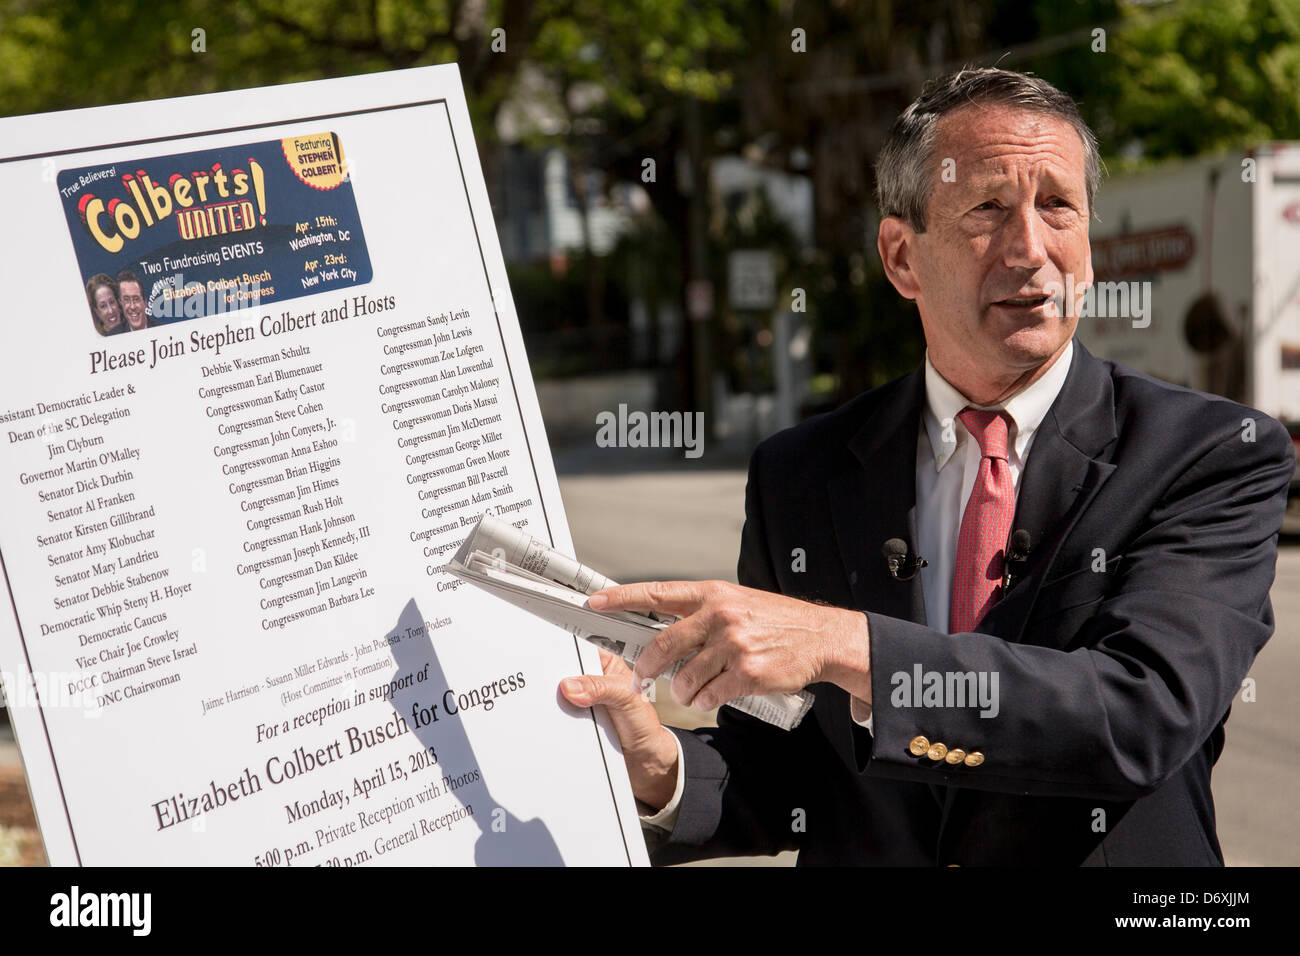 Former South Carolina Governor Mark Sanford during a campaign event on April 24, 2013 in Charleston, South Carolina. During the event Sanford debated a cardboard cutout of House Minority Leader Nancy Pelosi. Stock Photo